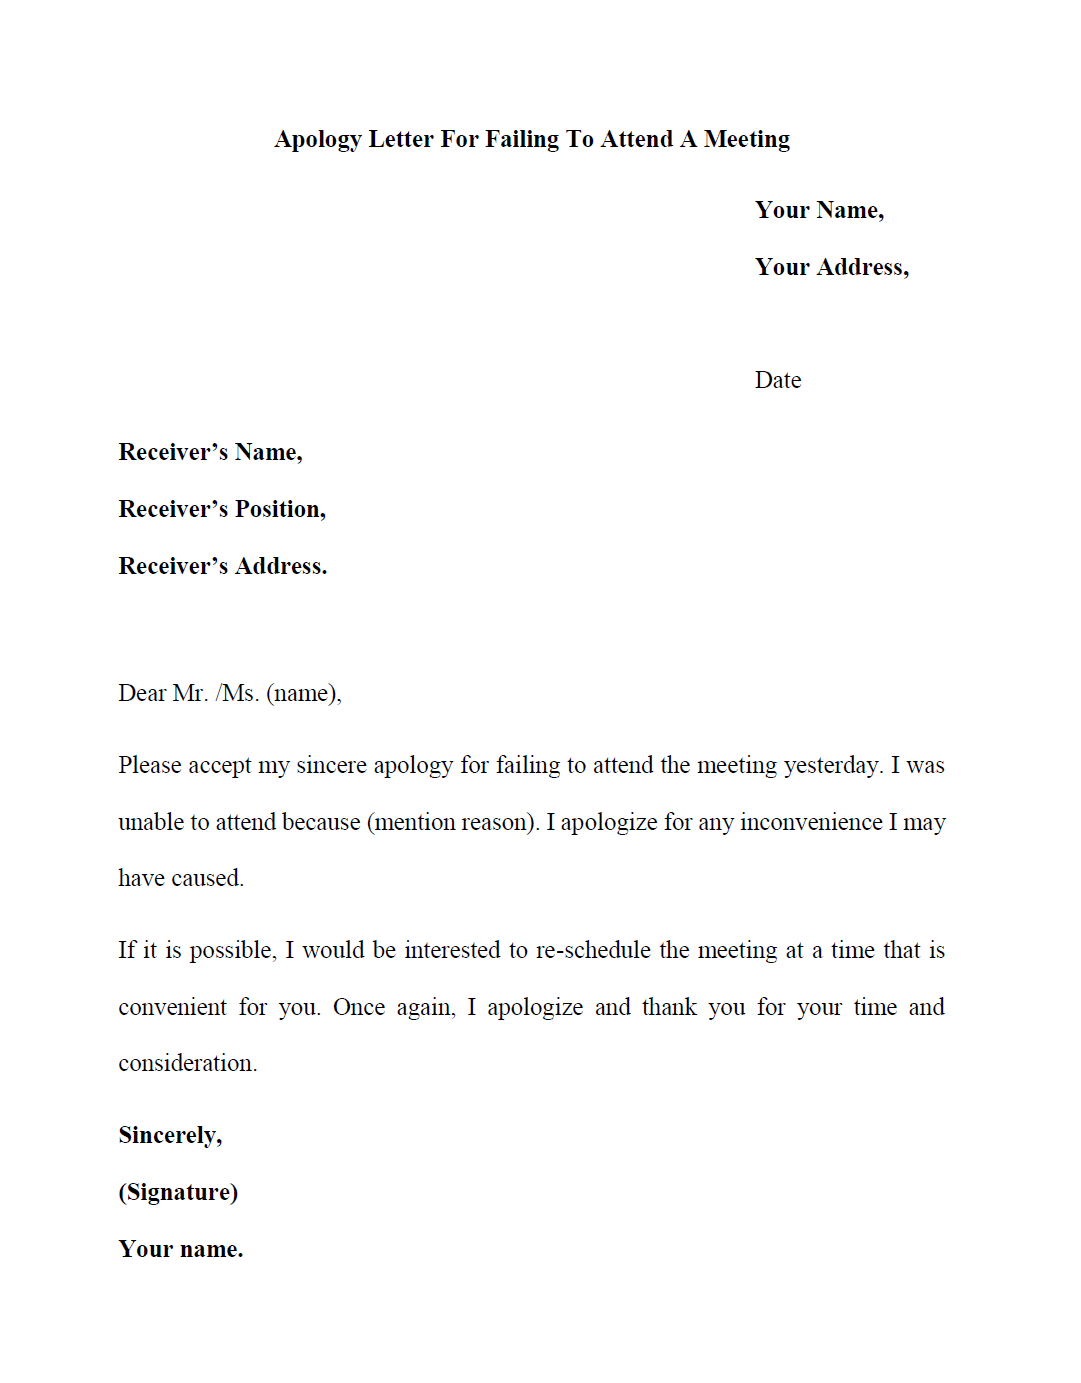 Apology Letter For Failing To Attend A Meeting